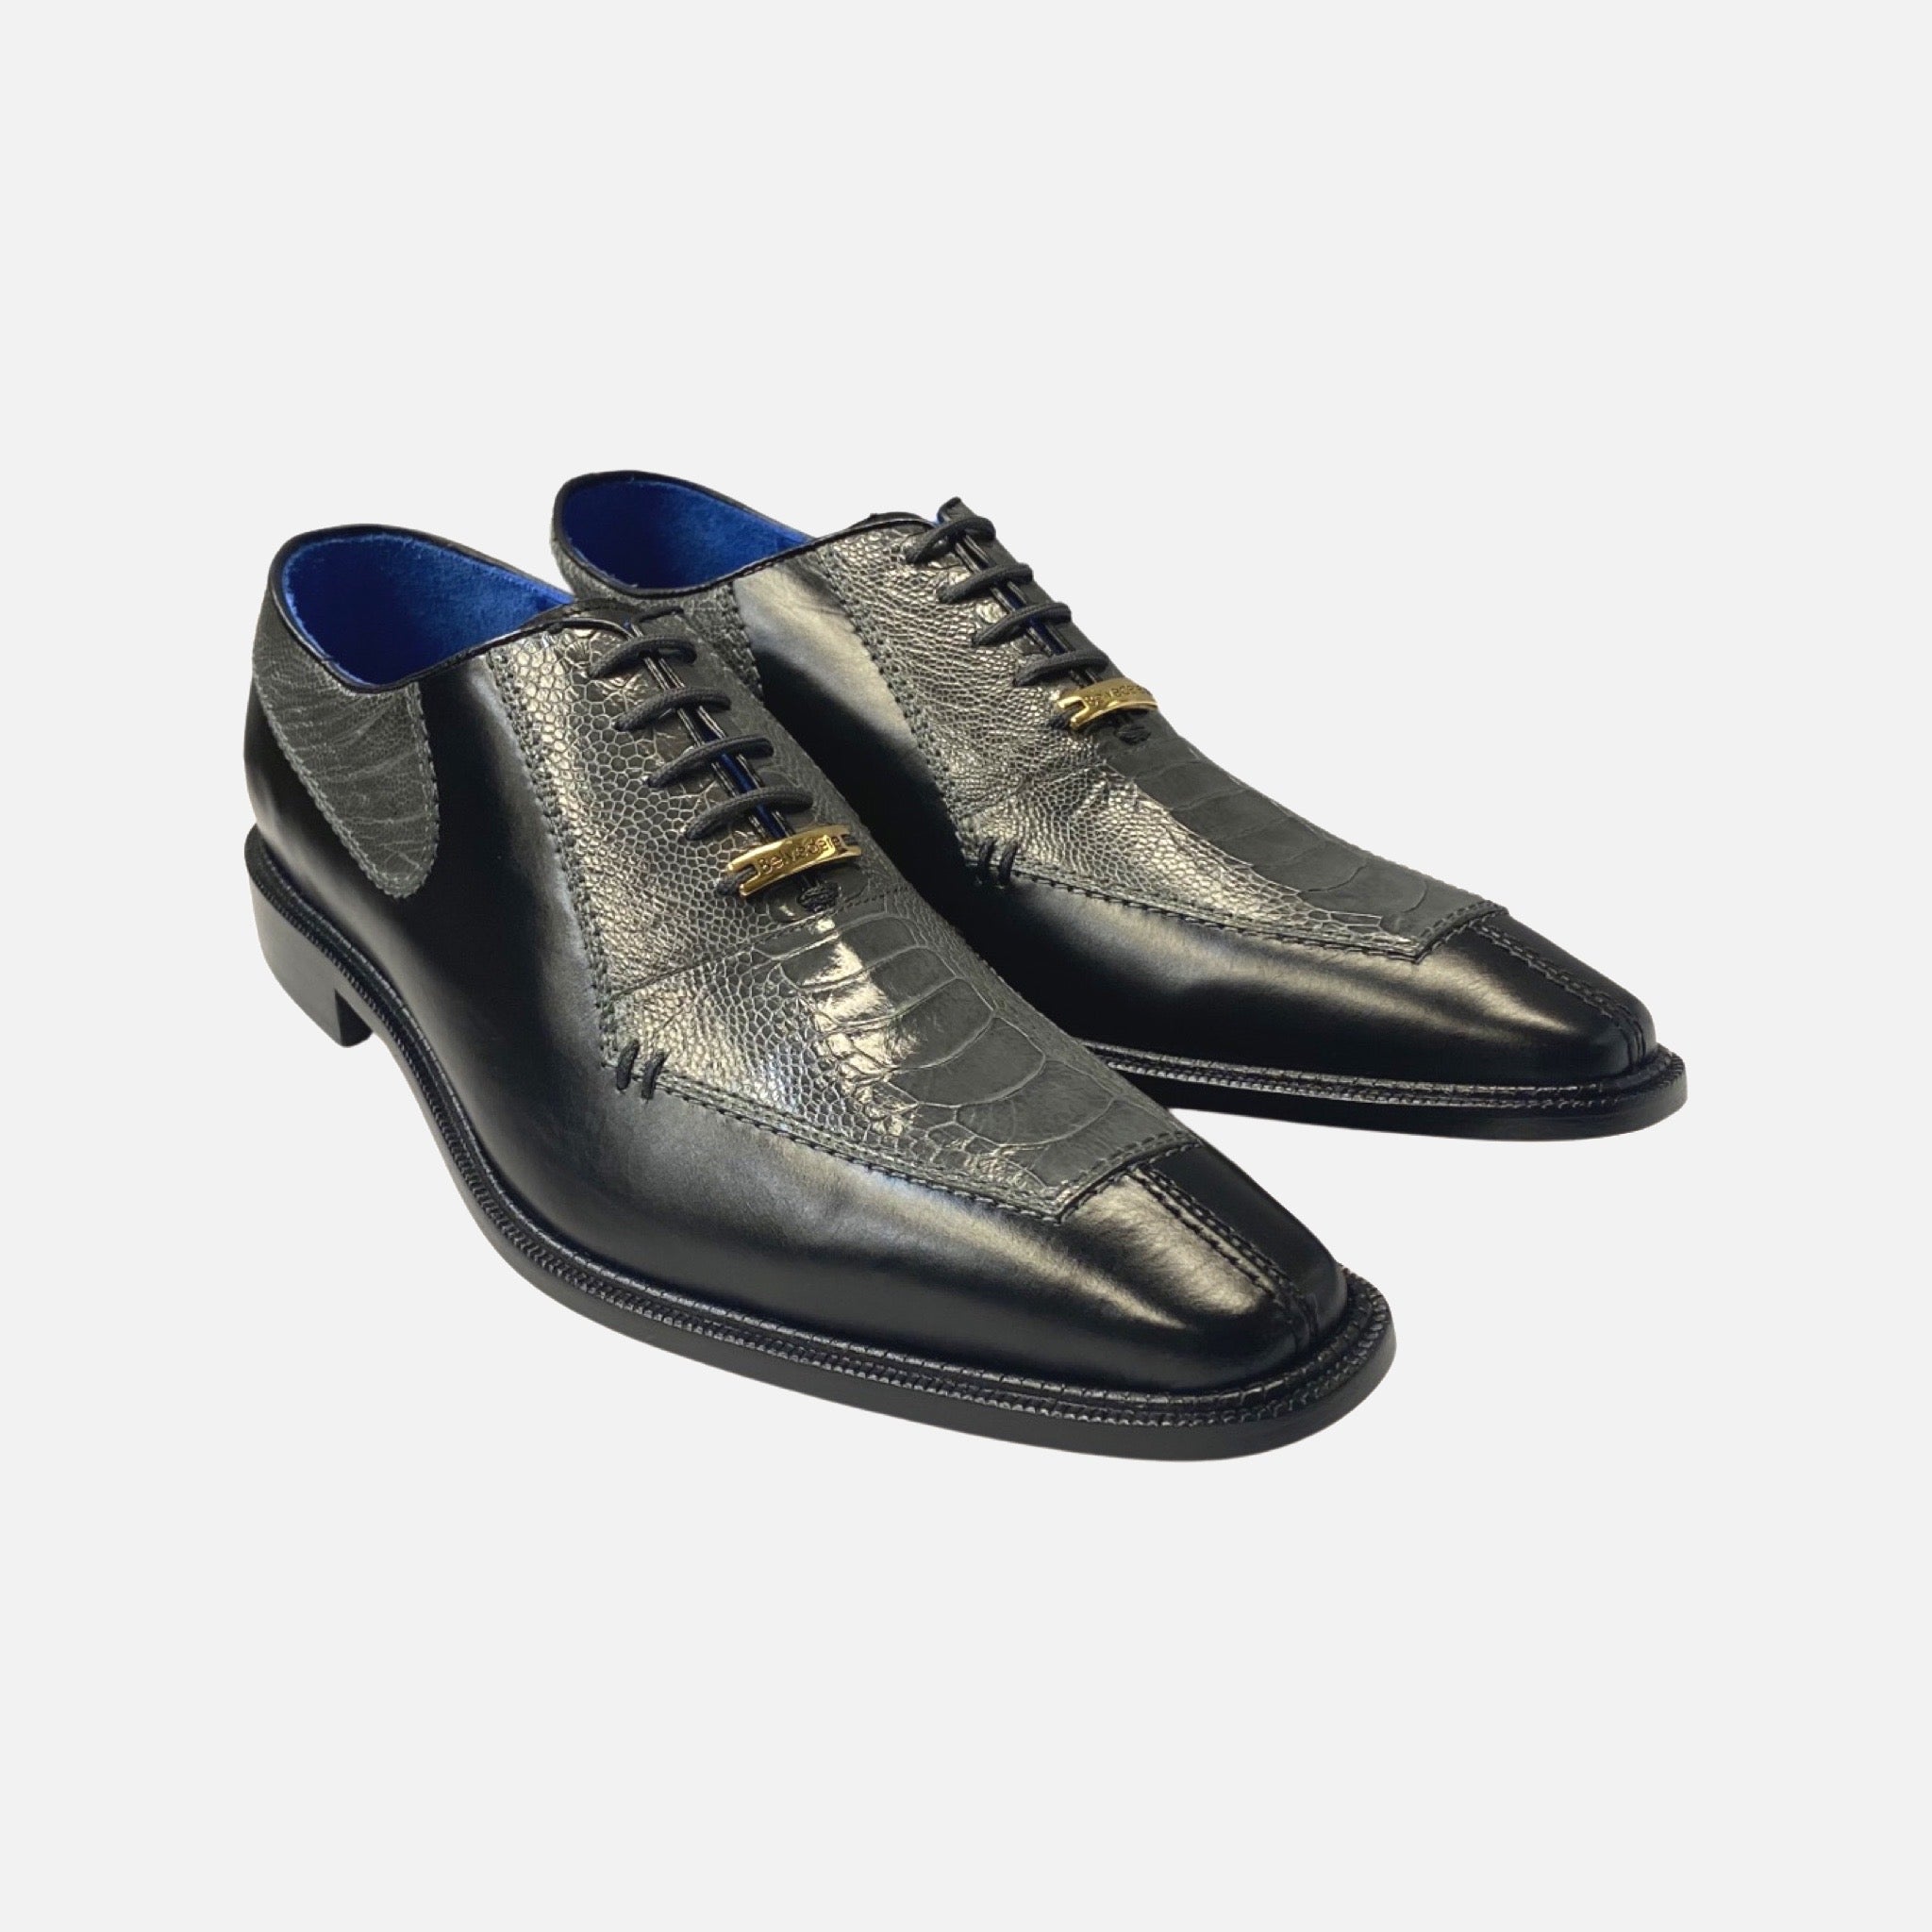 Mens Ostrich shoe by belvedere